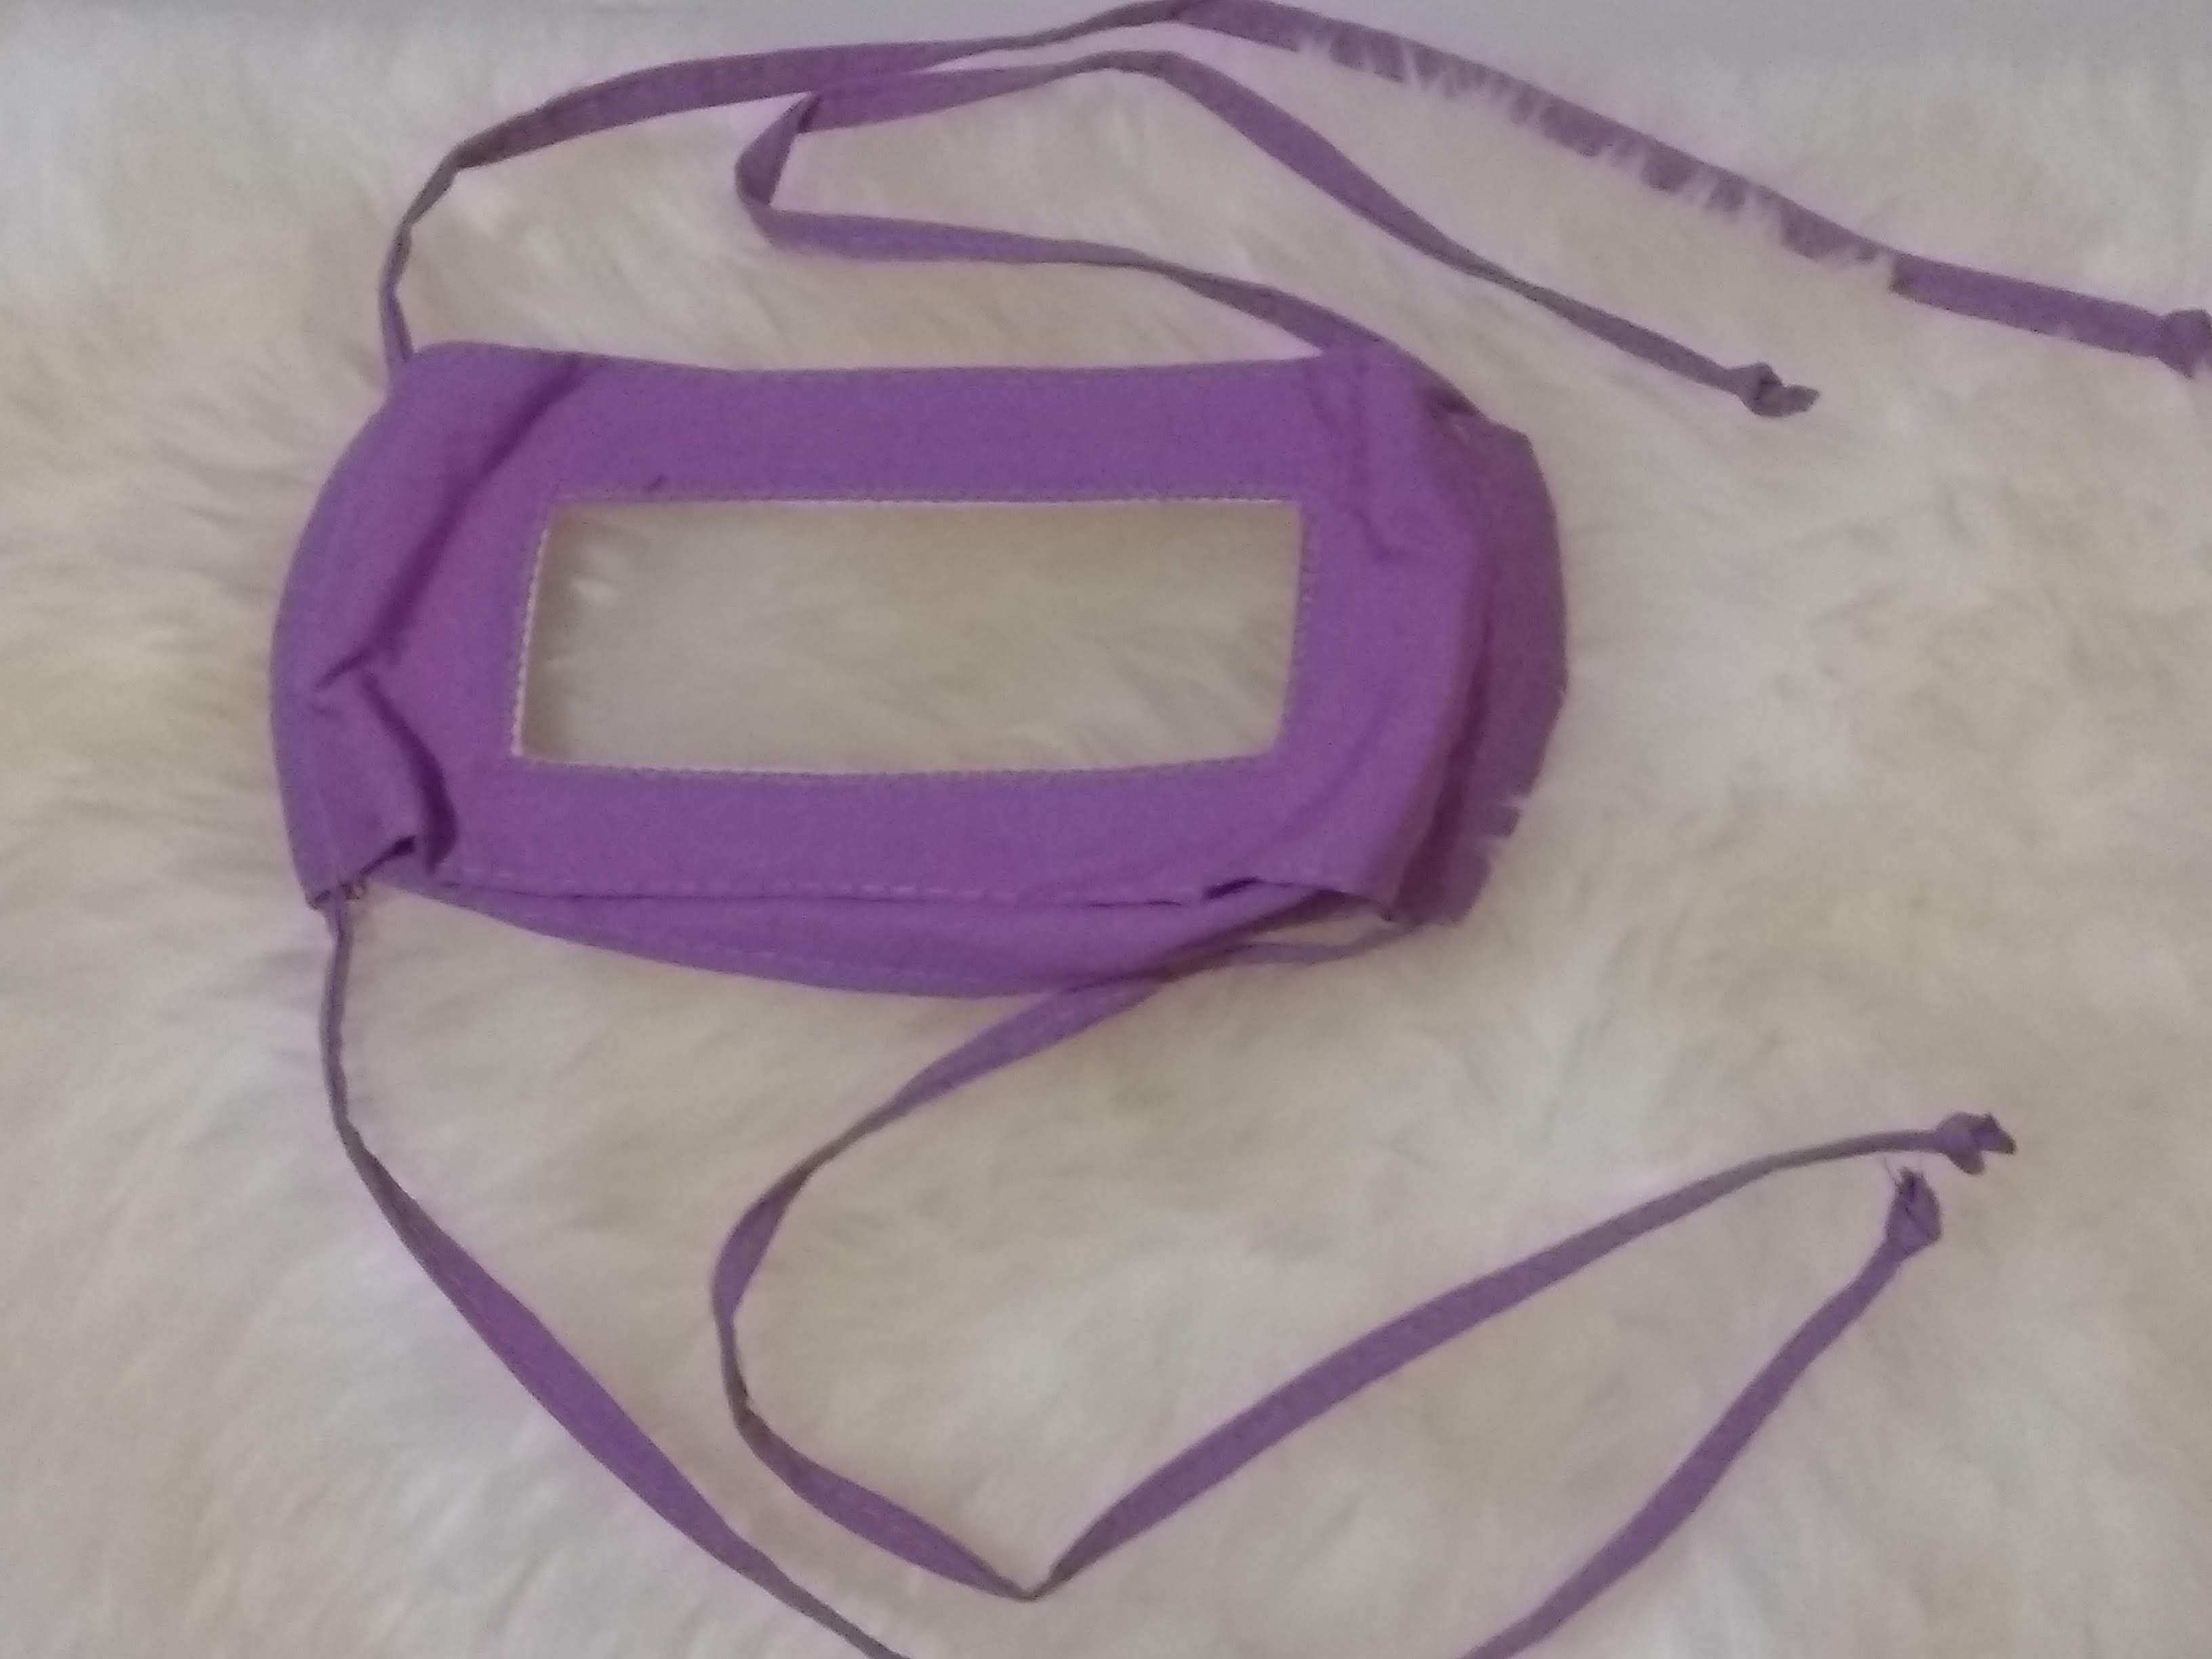 Image of the windowed mask in purple.